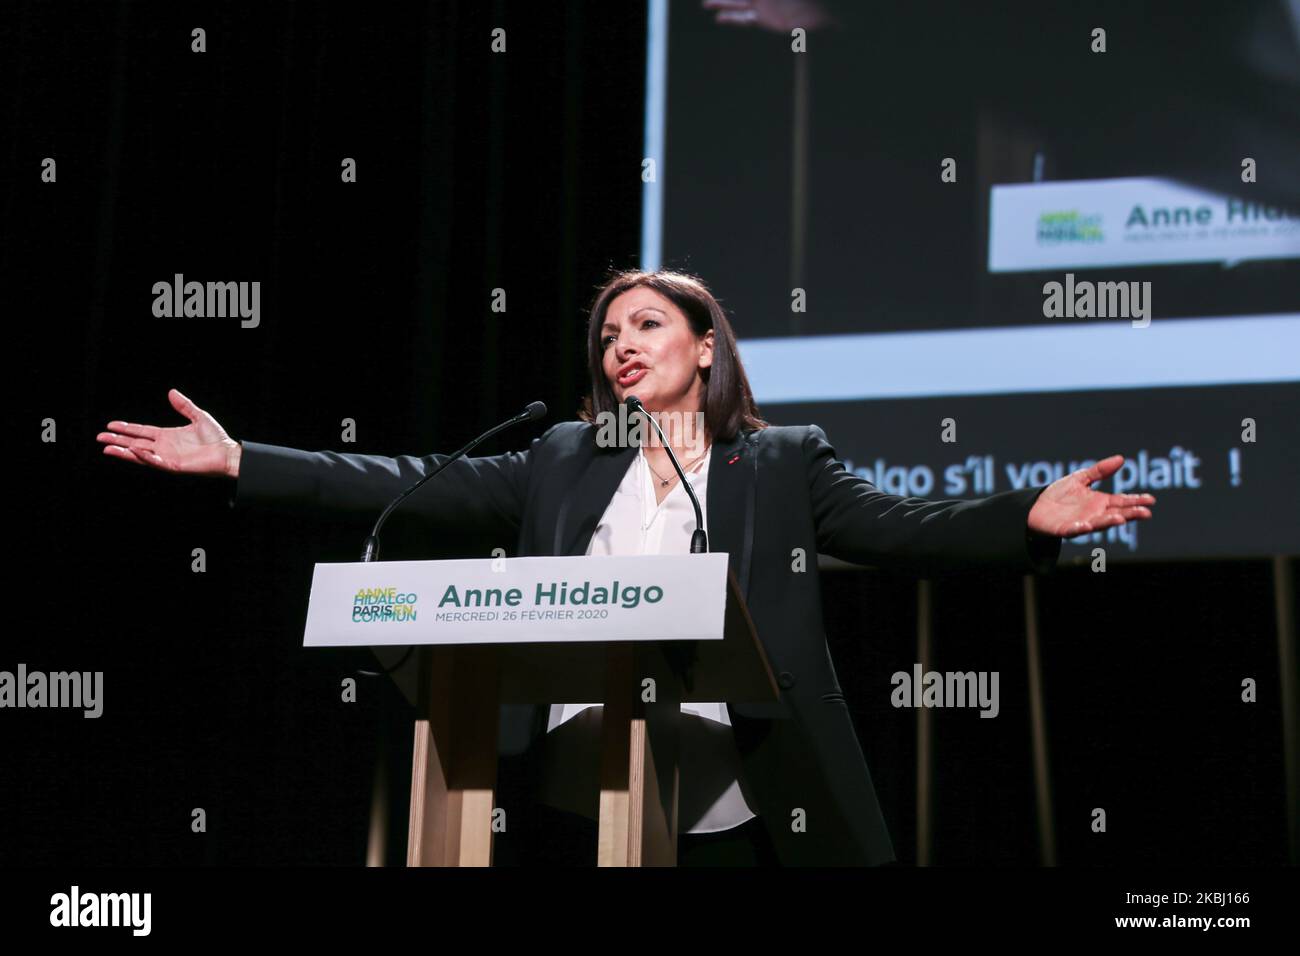 Paris Mayor and candidate for re-election Anne Hidalgo gestures as she delivers a speech during a campaign meeting at the Elysee Montmartre venue in Paris, on February 26, 2020, ahead of March 2020 mayoral elections in France. (Photo by Michel Stoupak/NurPhoto) Stock Photo